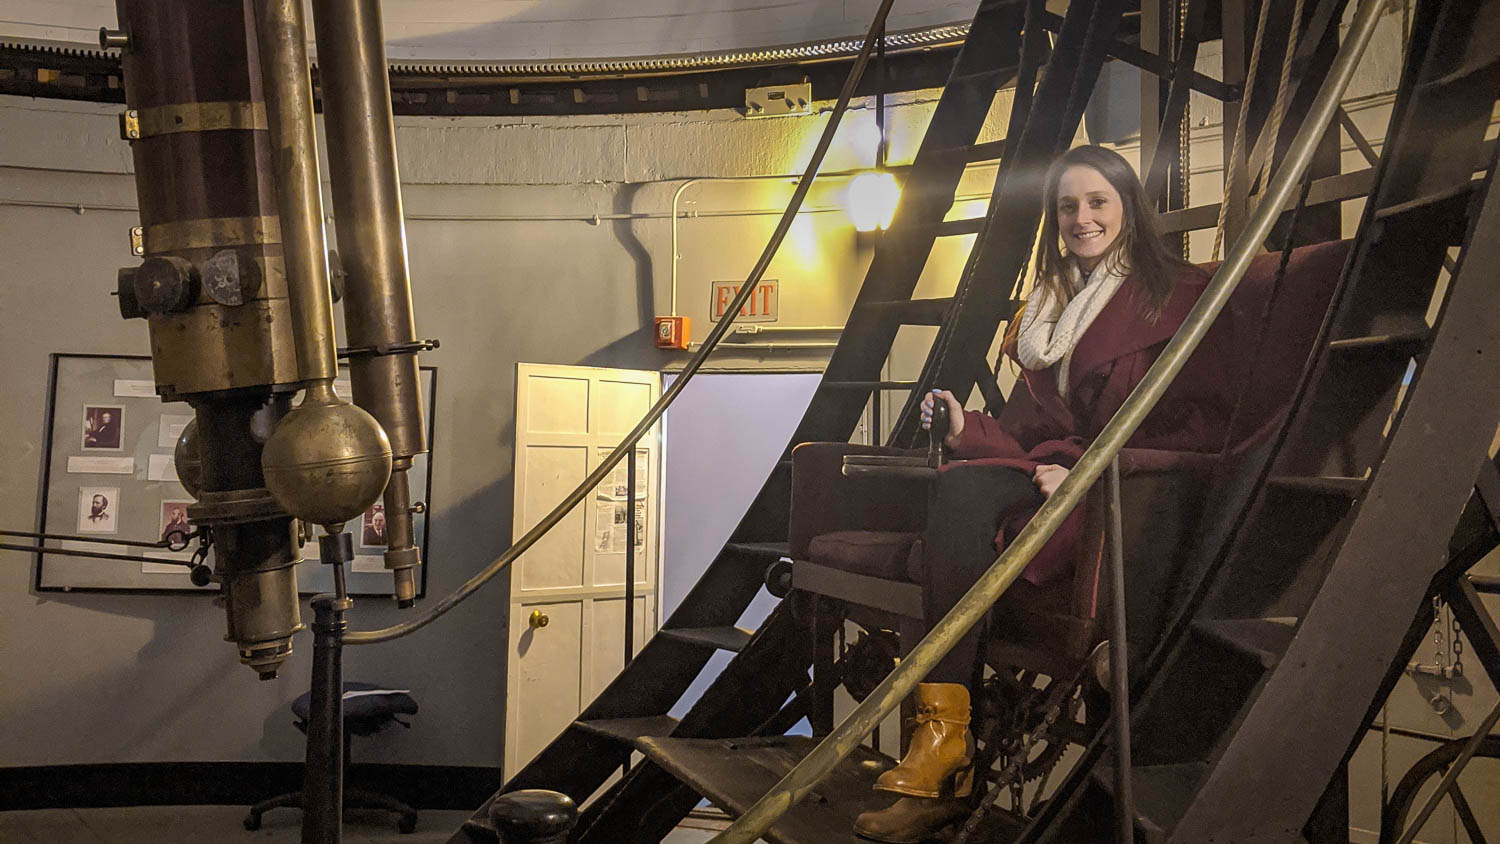 Jordan Eagle, a Ph.D. candidate in the Clemson University Department of Physics and Astronomy, sits in the refractor at the Harvard Smithsonian Astrophysics Center.